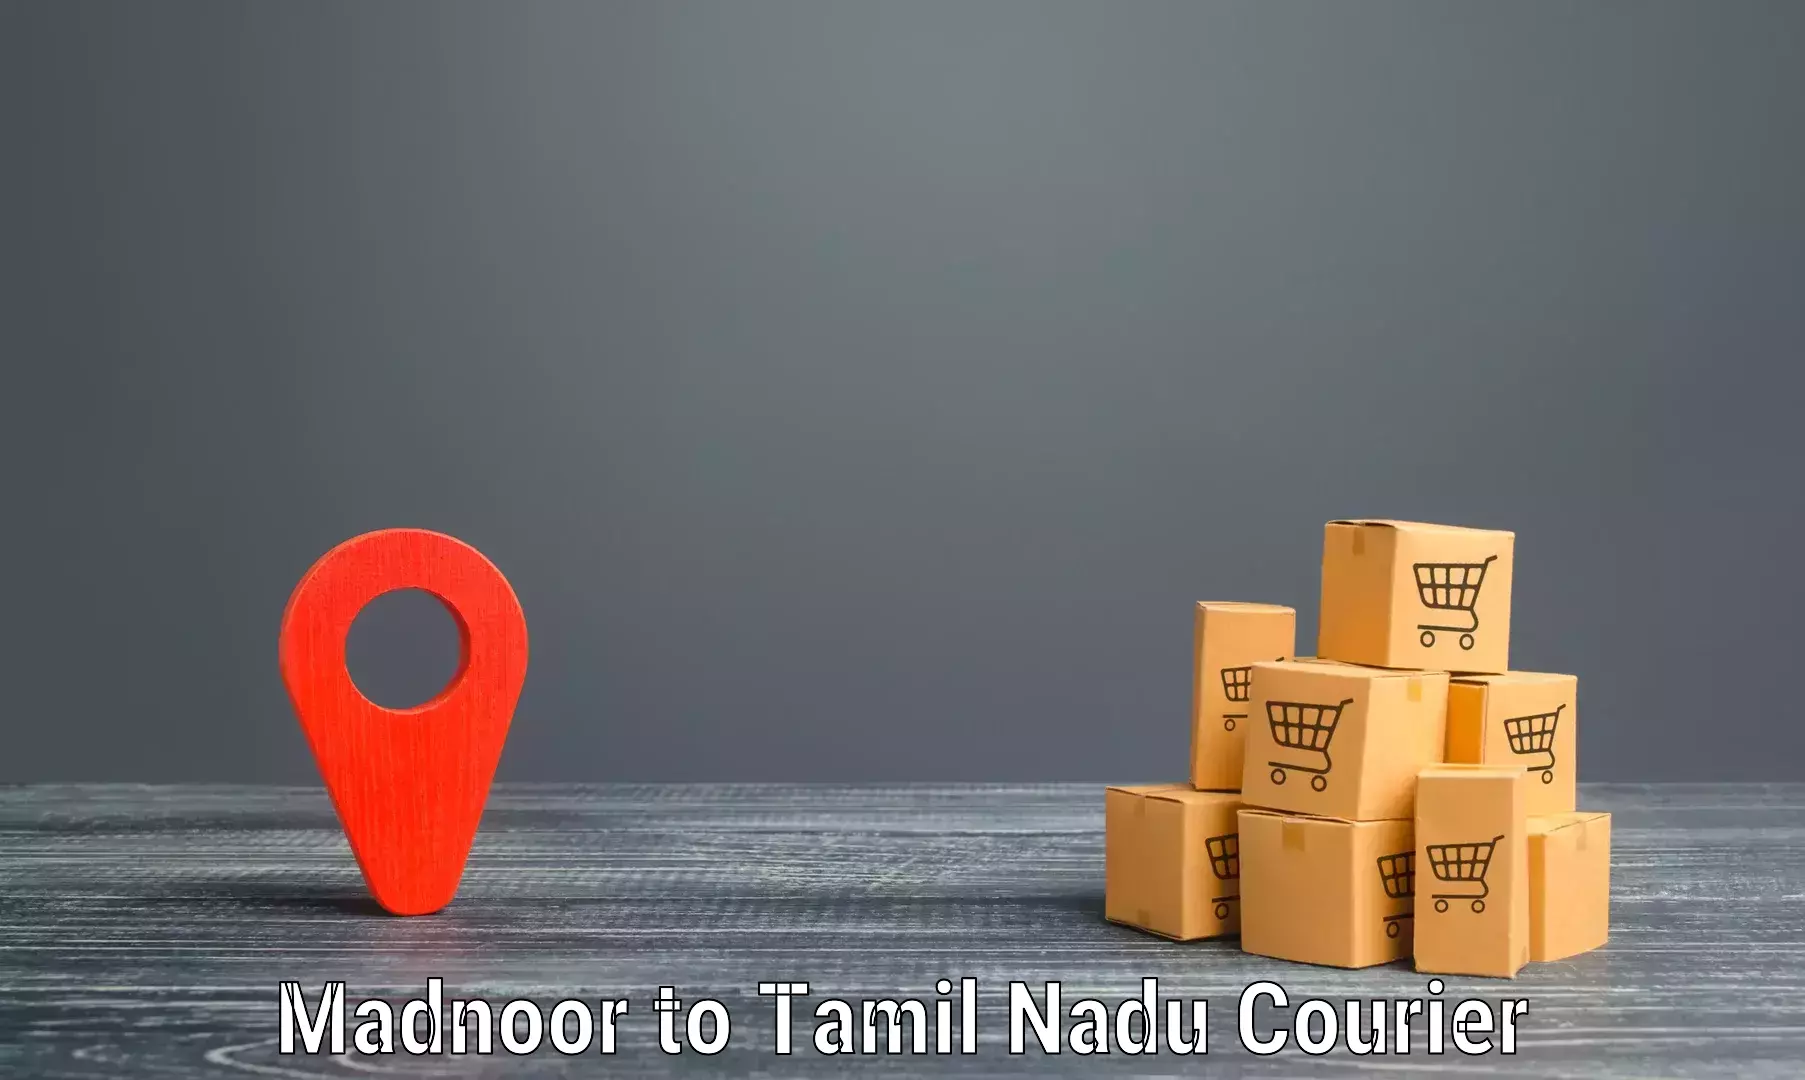 Courier service partnerships in Madnoor to Chennai